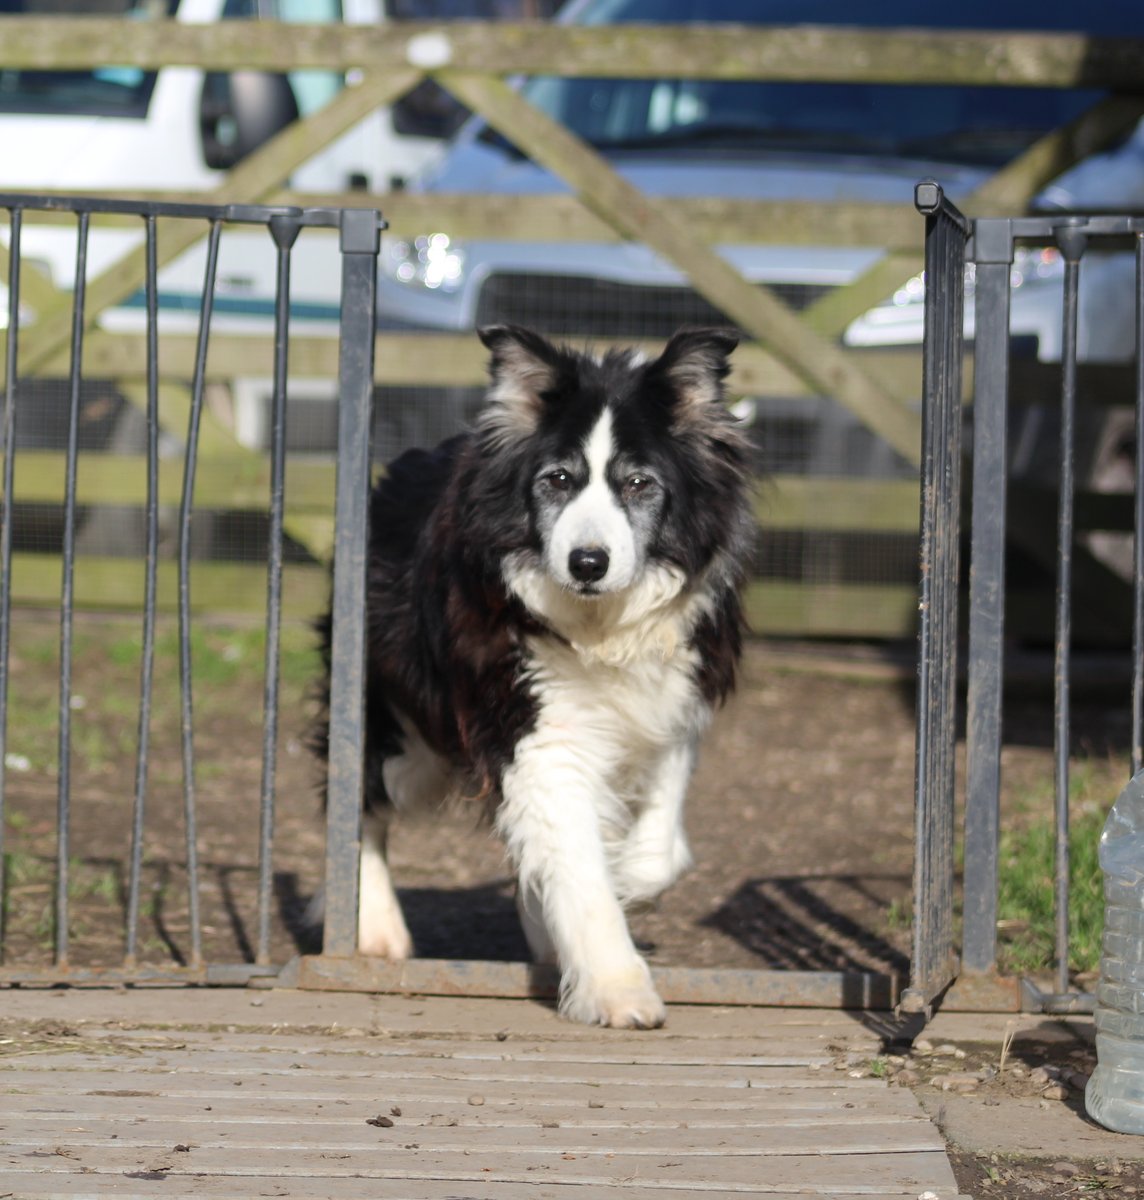 Domino stepping out at 13yrs old on a mission to get to the paddock.
#goldenoldies #rescuedogs #bordercollies